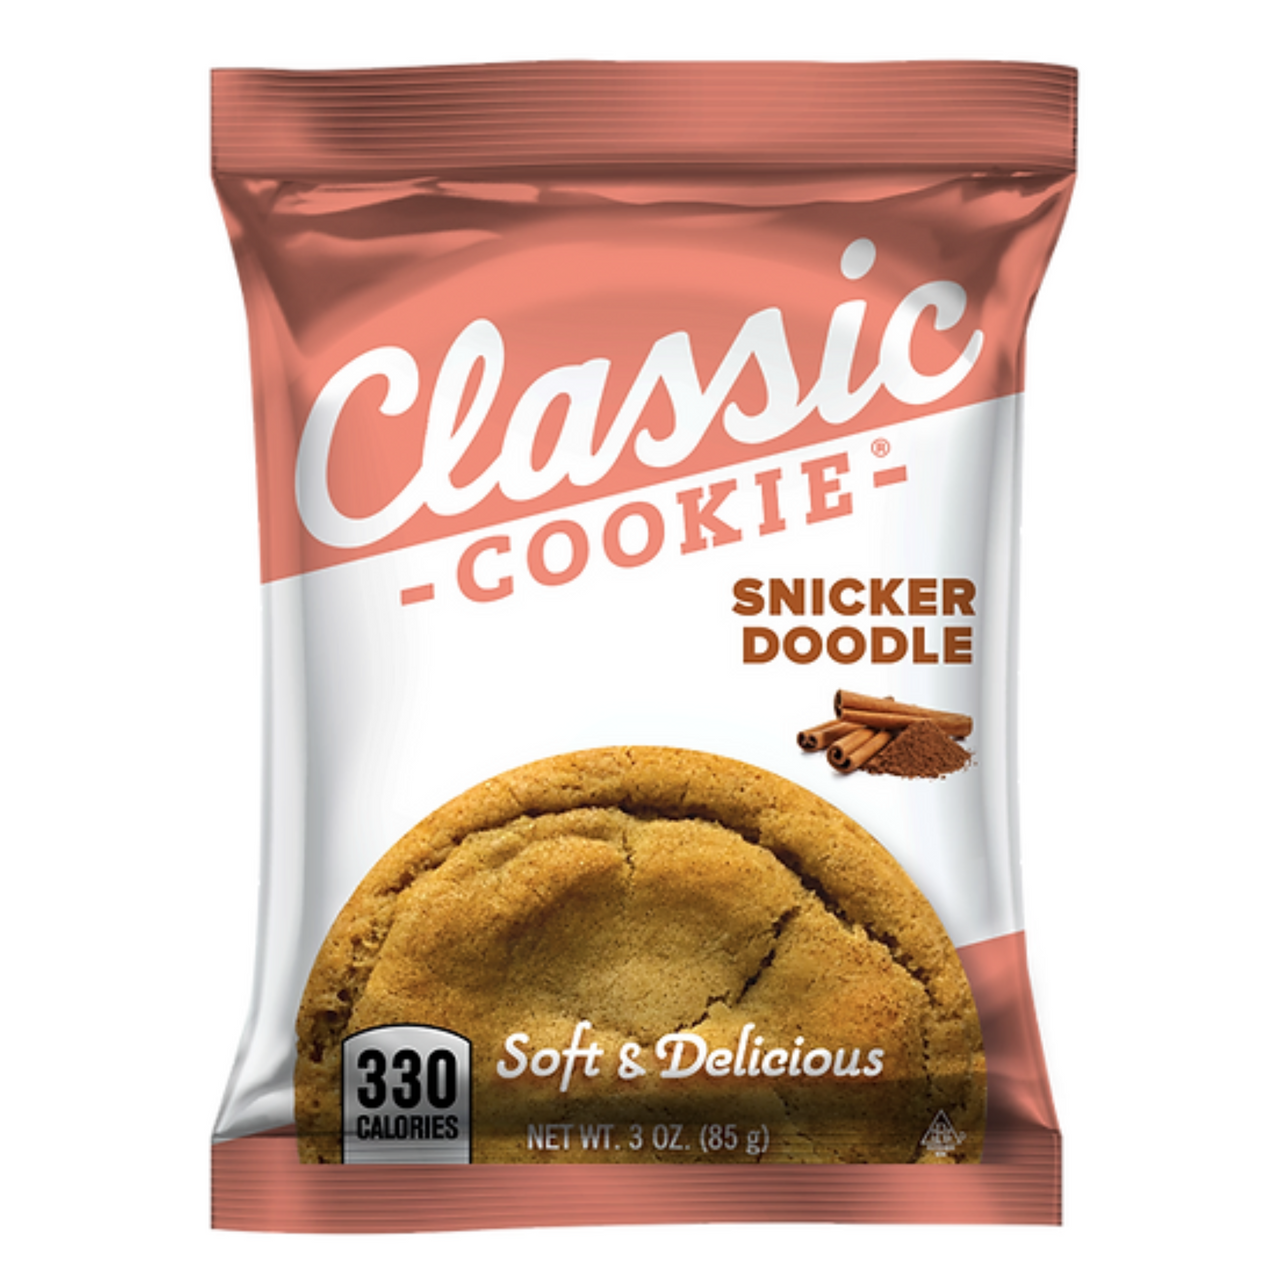 https://cdn11.bigcommerce.com/s-fp5opfnomp/images/stencil/1280x1280/products/2702/24546/1819_Single_Cookie_in_Packaging__80854.1668628043.png?c=2?imbypass=on